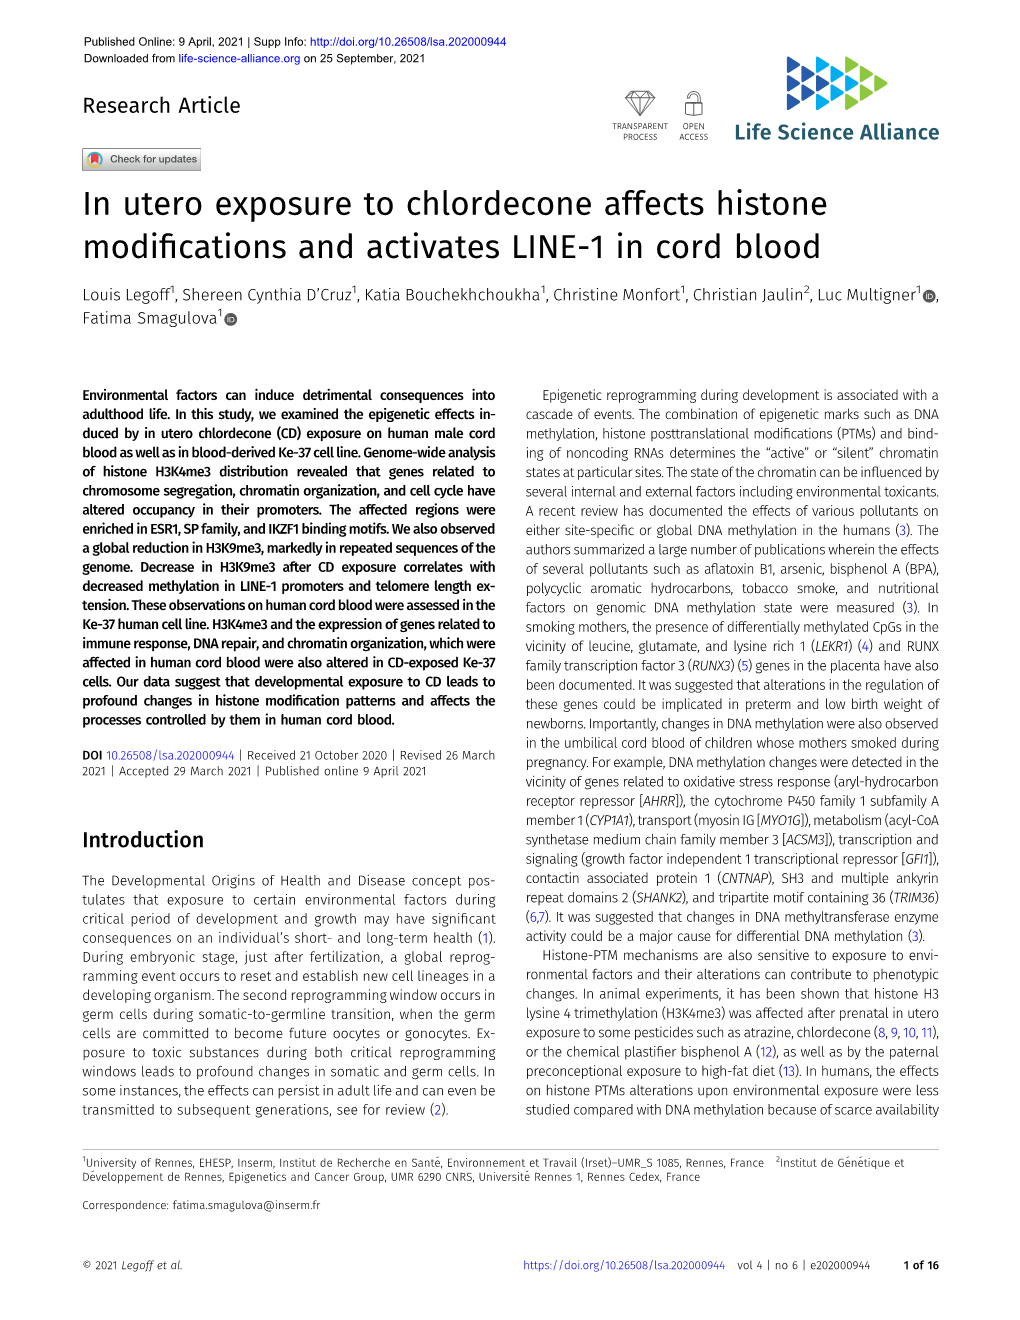 In Utero Exposure to Chlordecone Affects Histone Modifications and Activates LINE-1 in Cord Blood